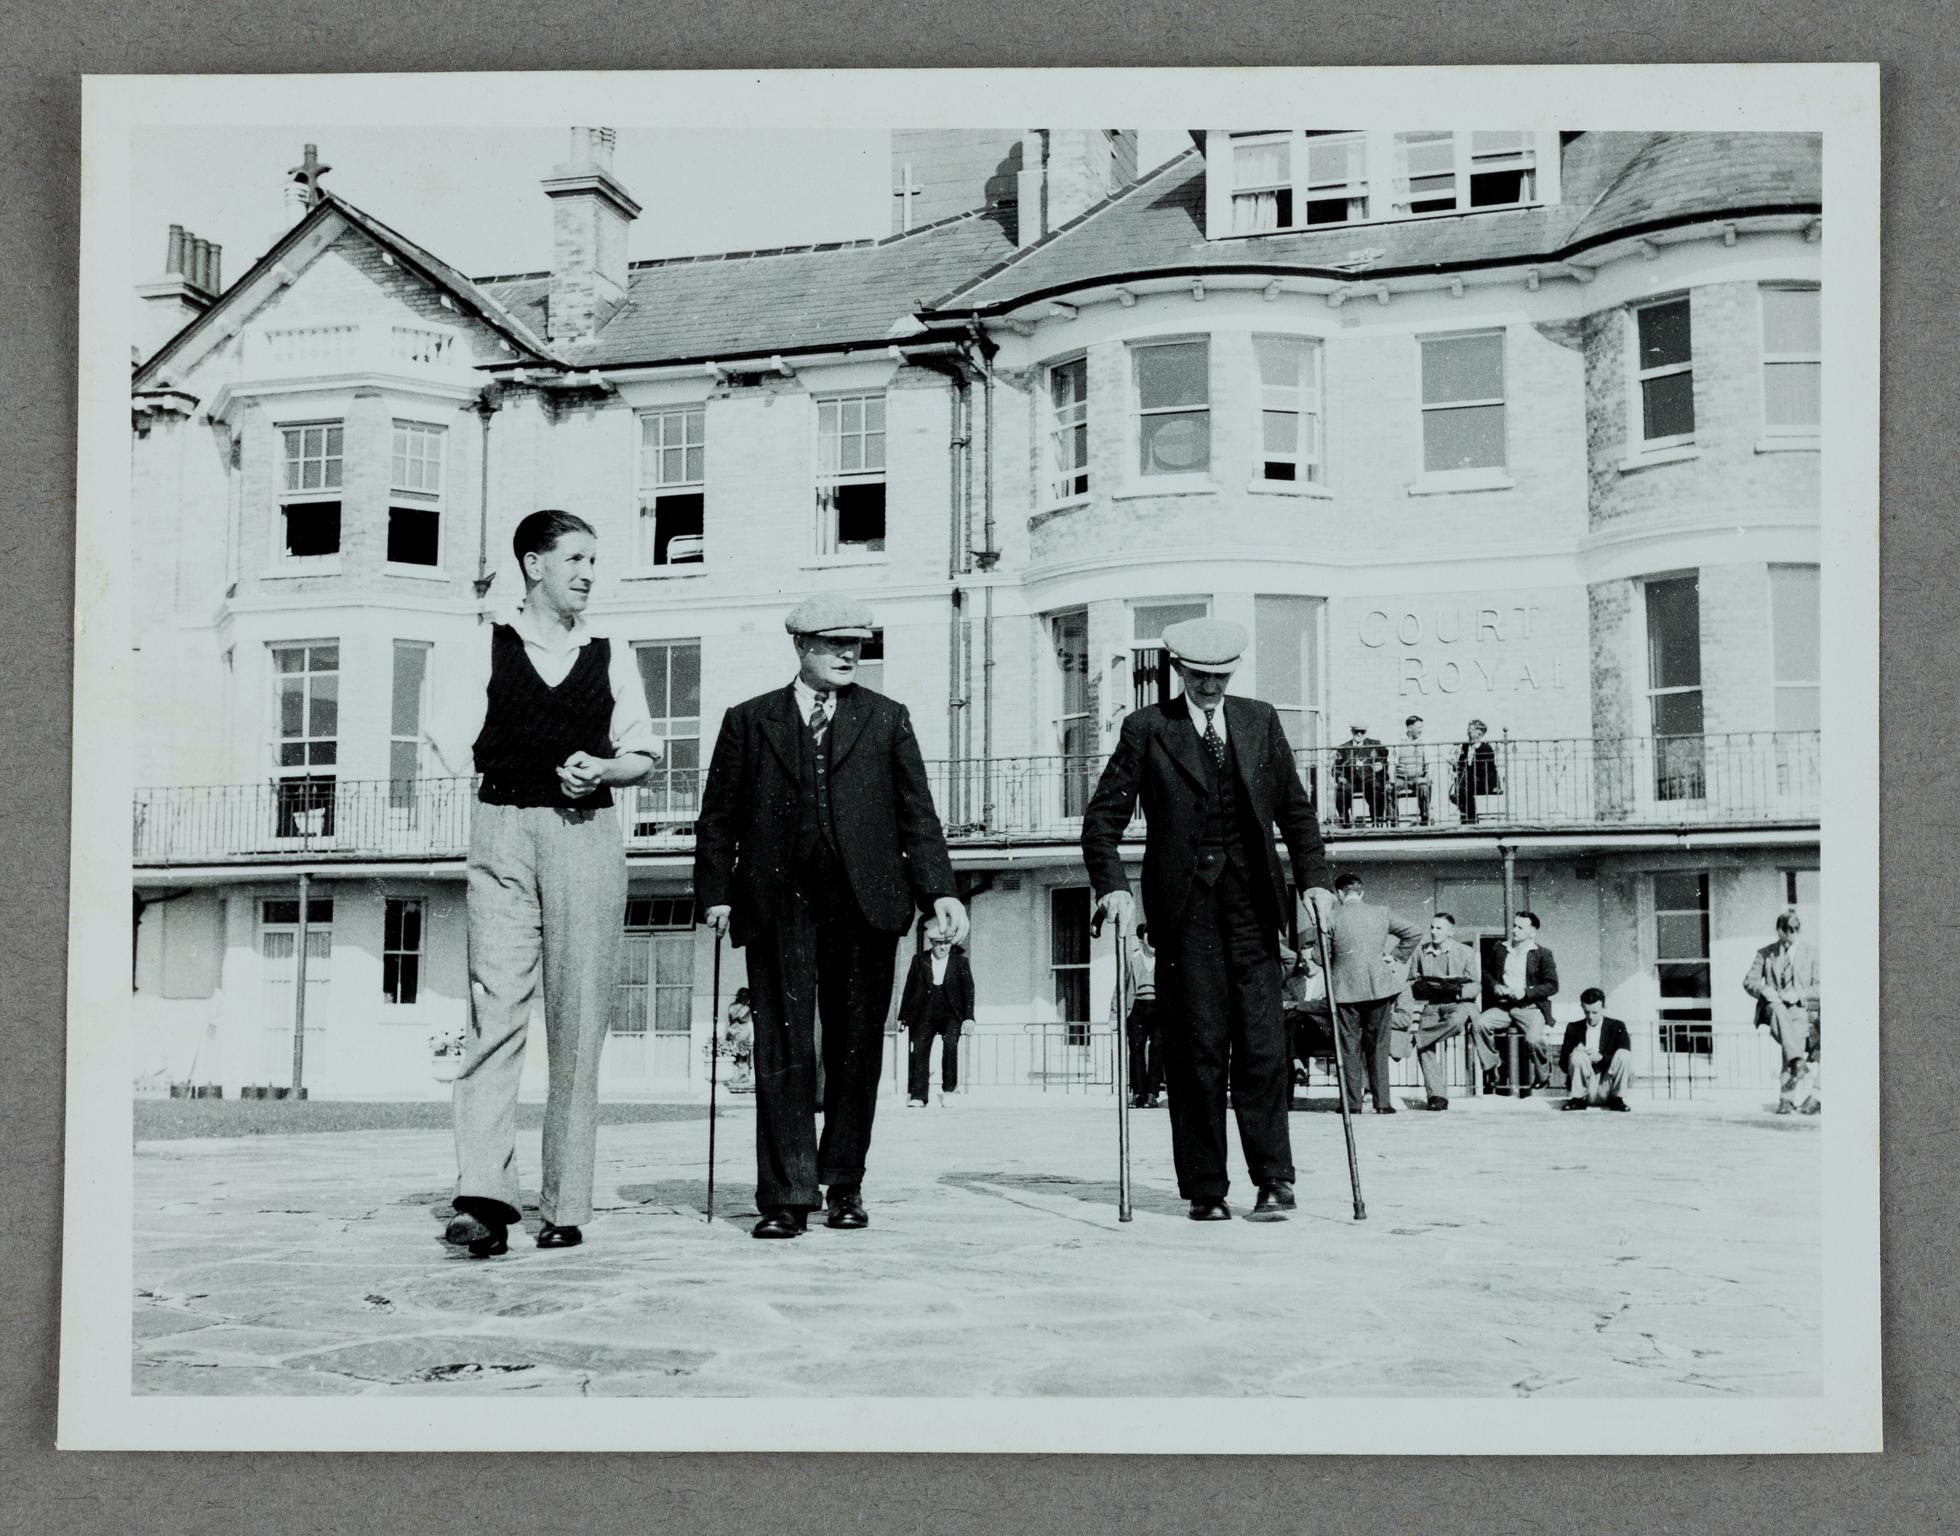 Court Royal miners' convalescent home, photograph